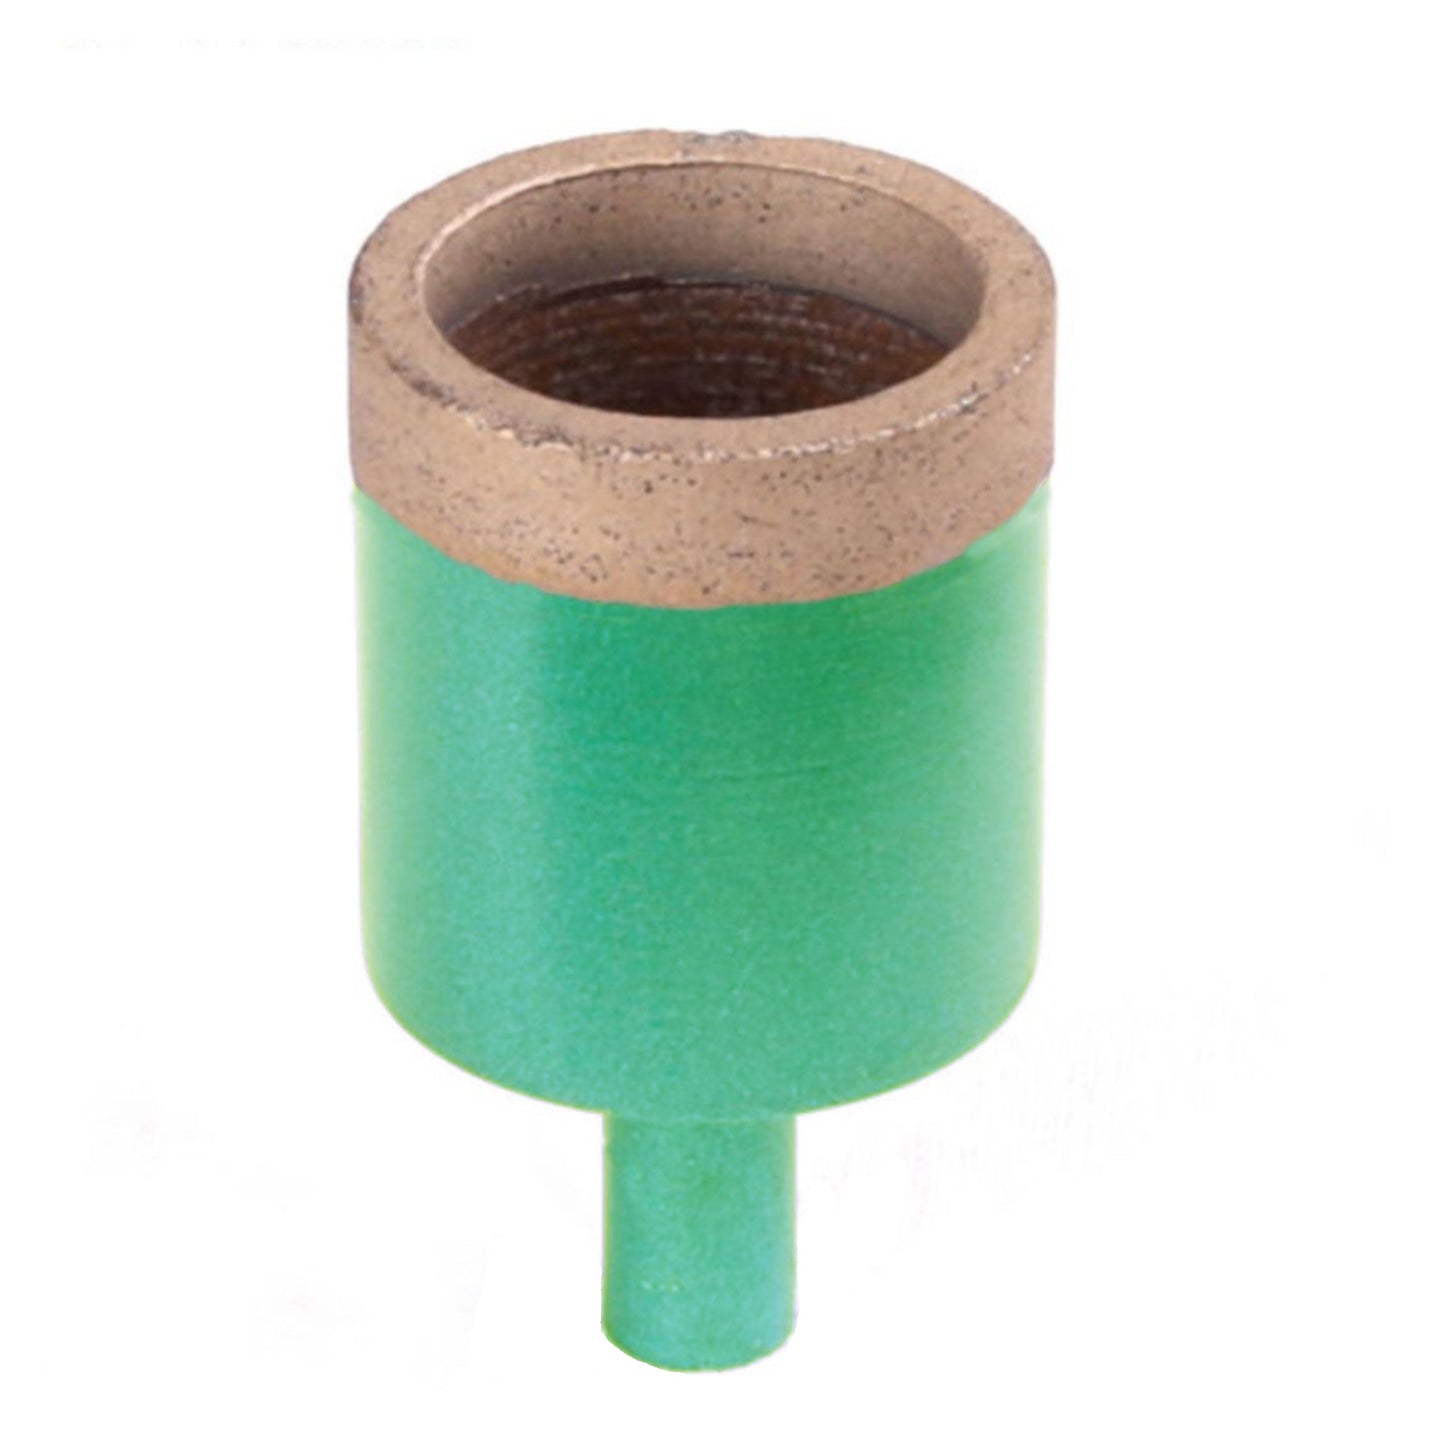 22mm - Grinding Cup